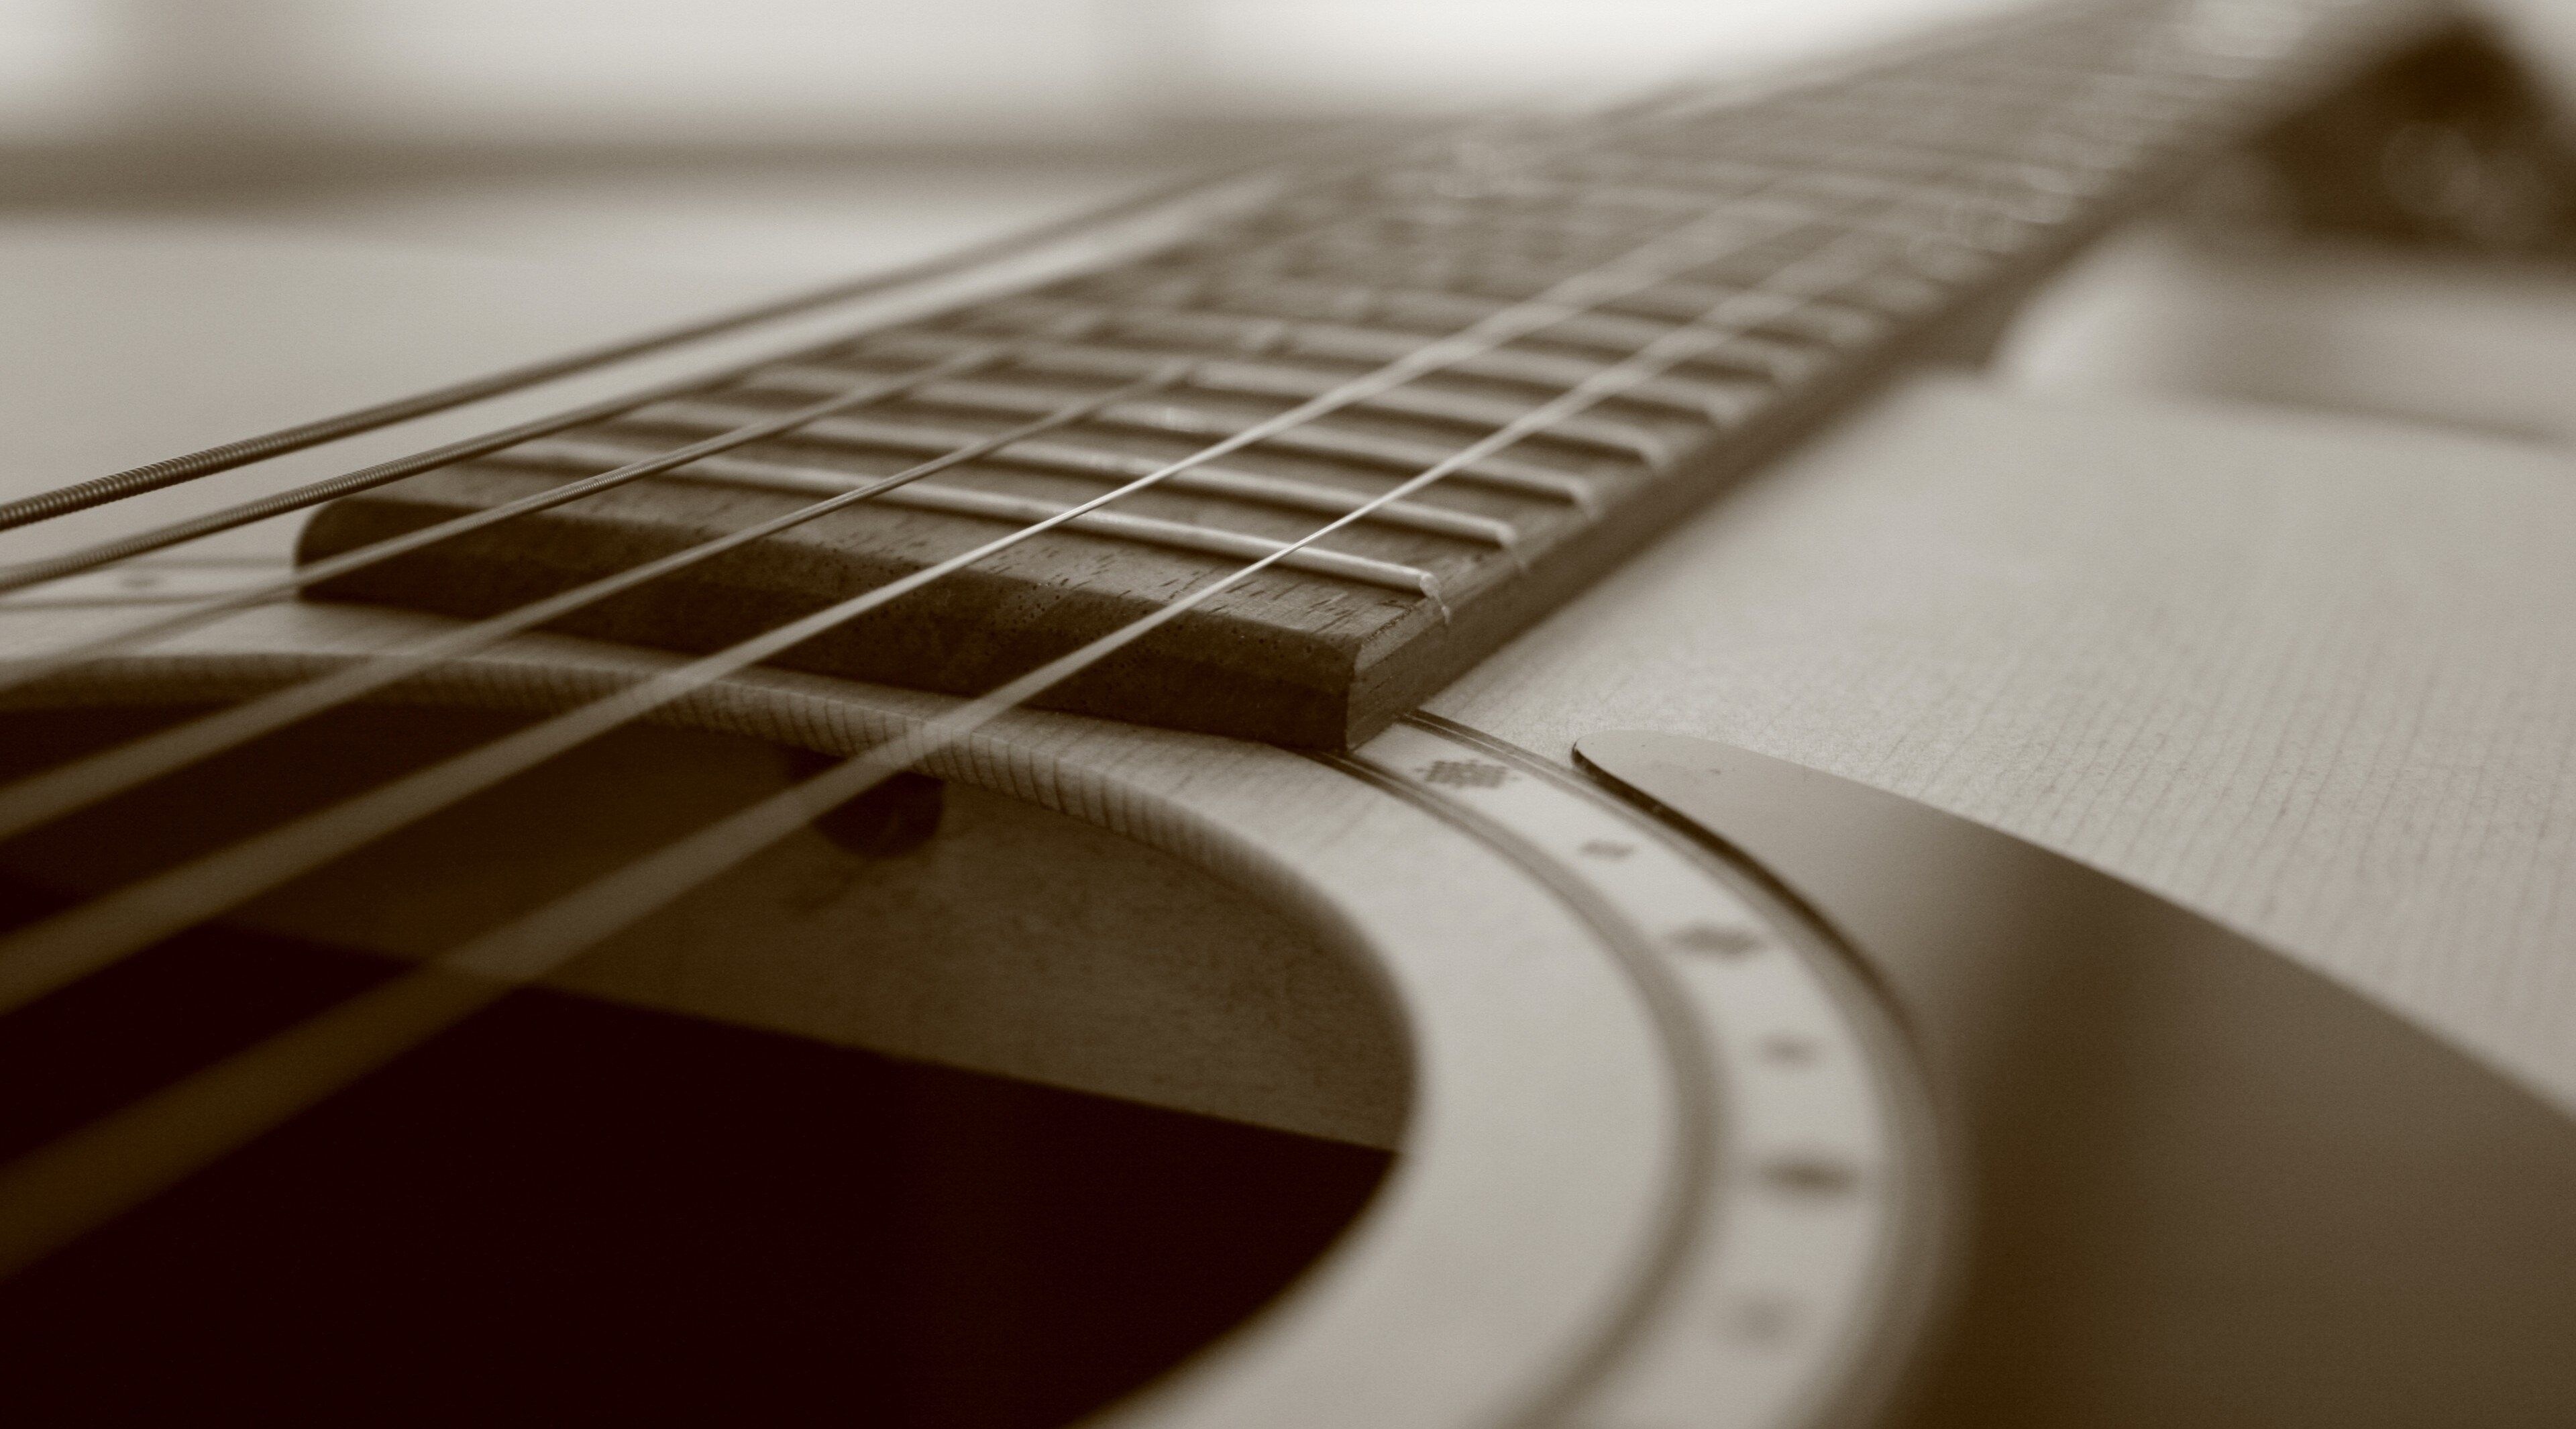 Guitar: Monochromic, Acoustic guitar, A fretted musical instrument that typically has six strings. 3840x2130 HD Wallpaper.